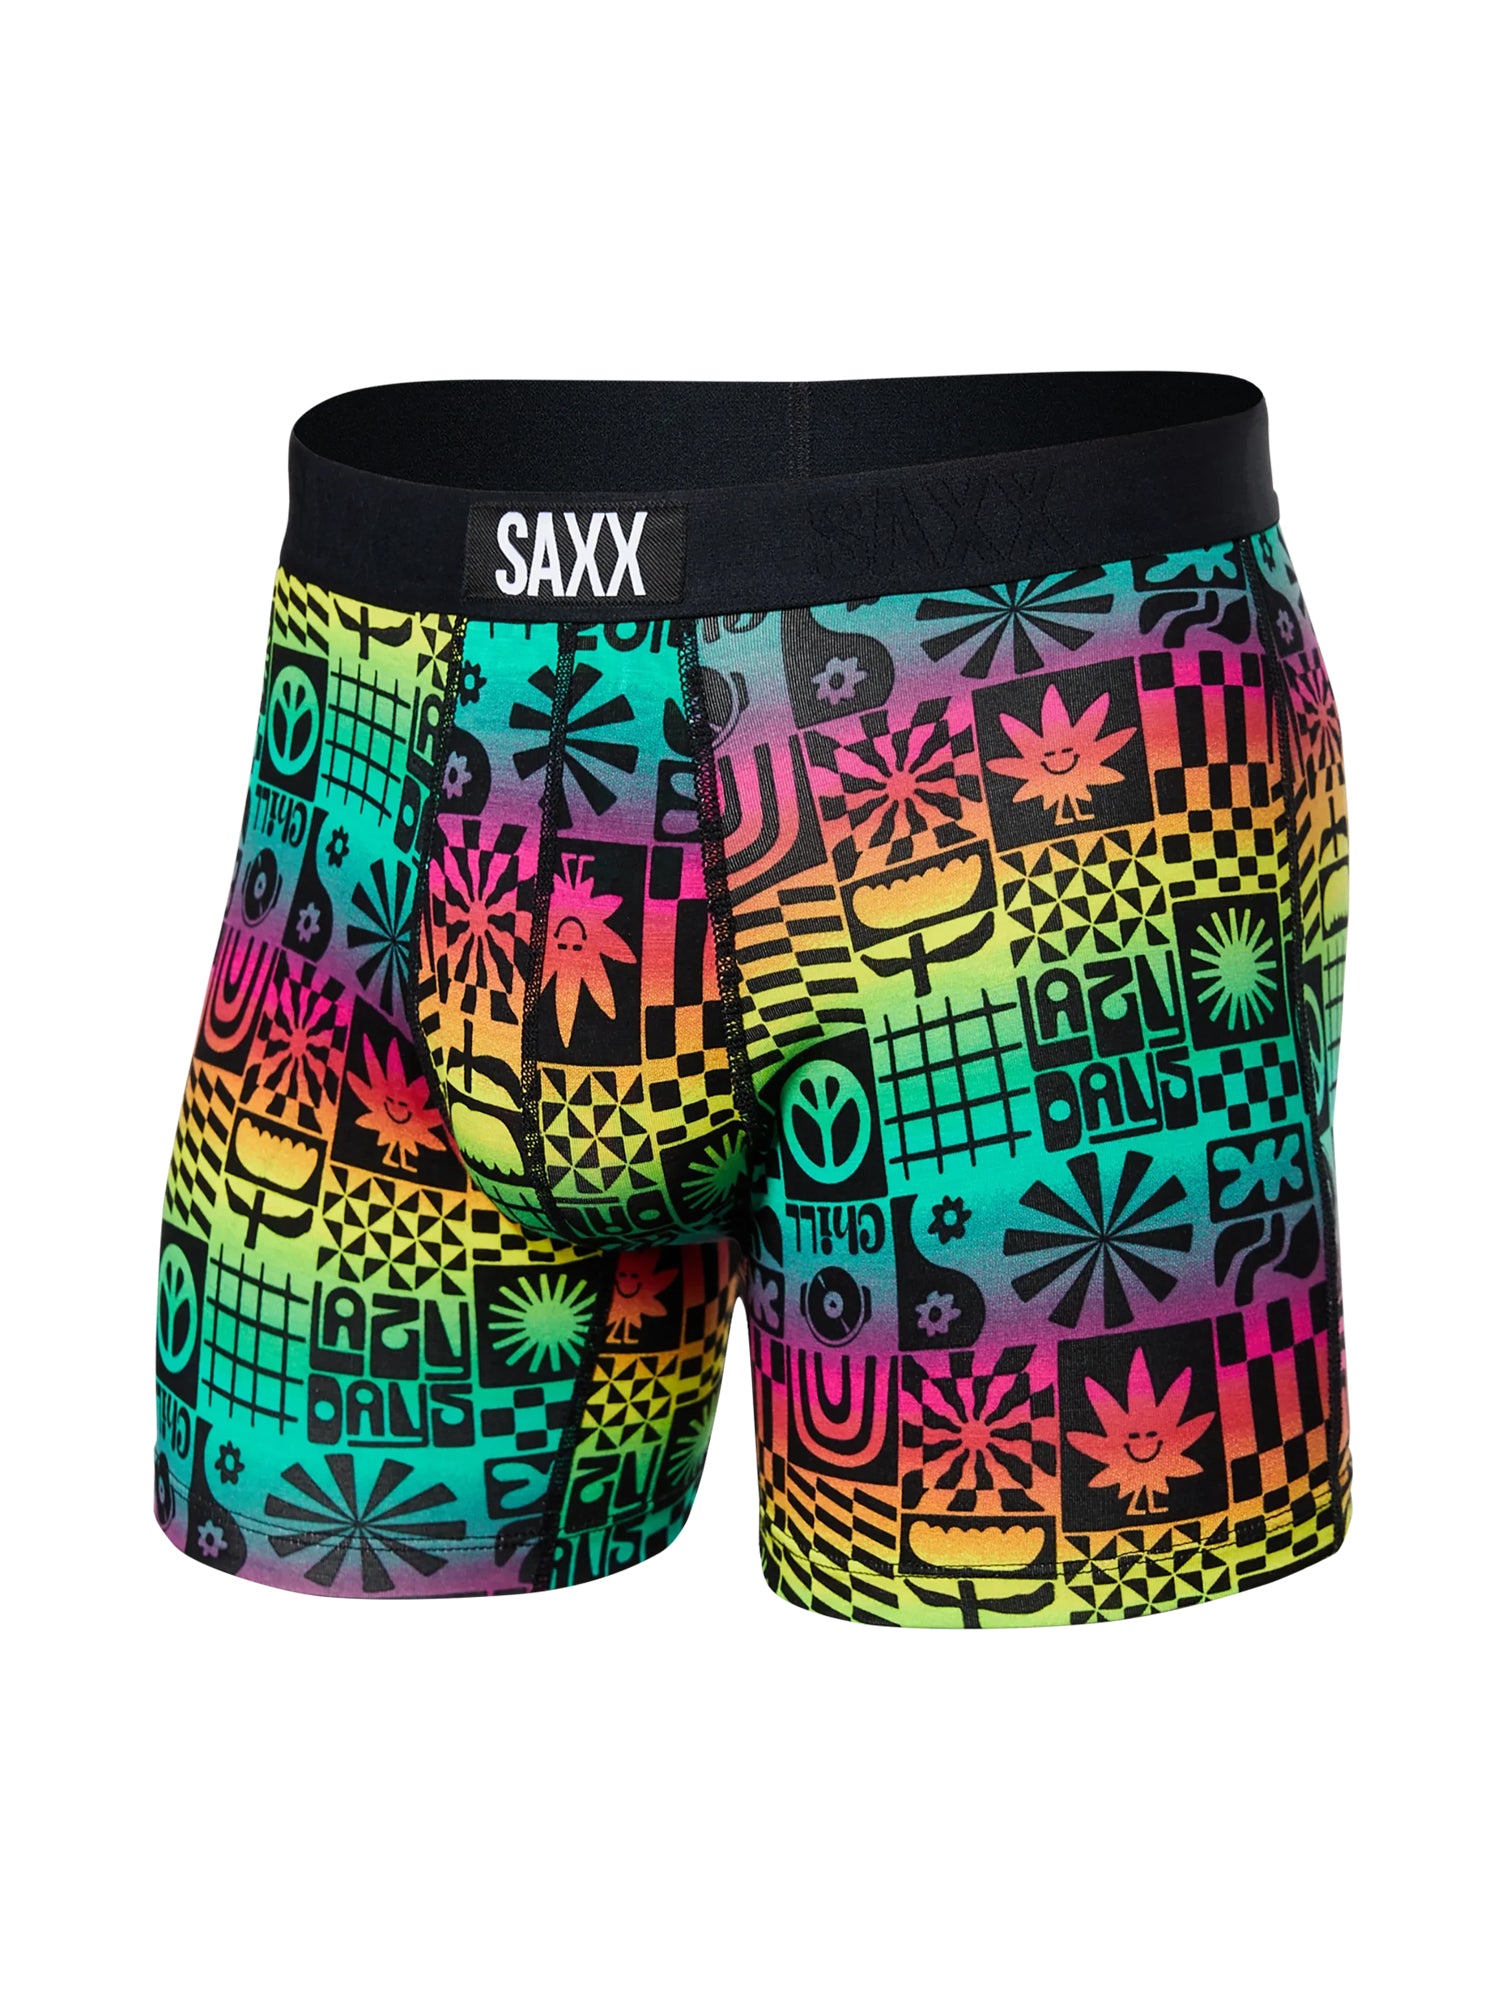 SAXX VIBE BOXER BRIEF - THE BRIGHT SIDE - CLEARANCE